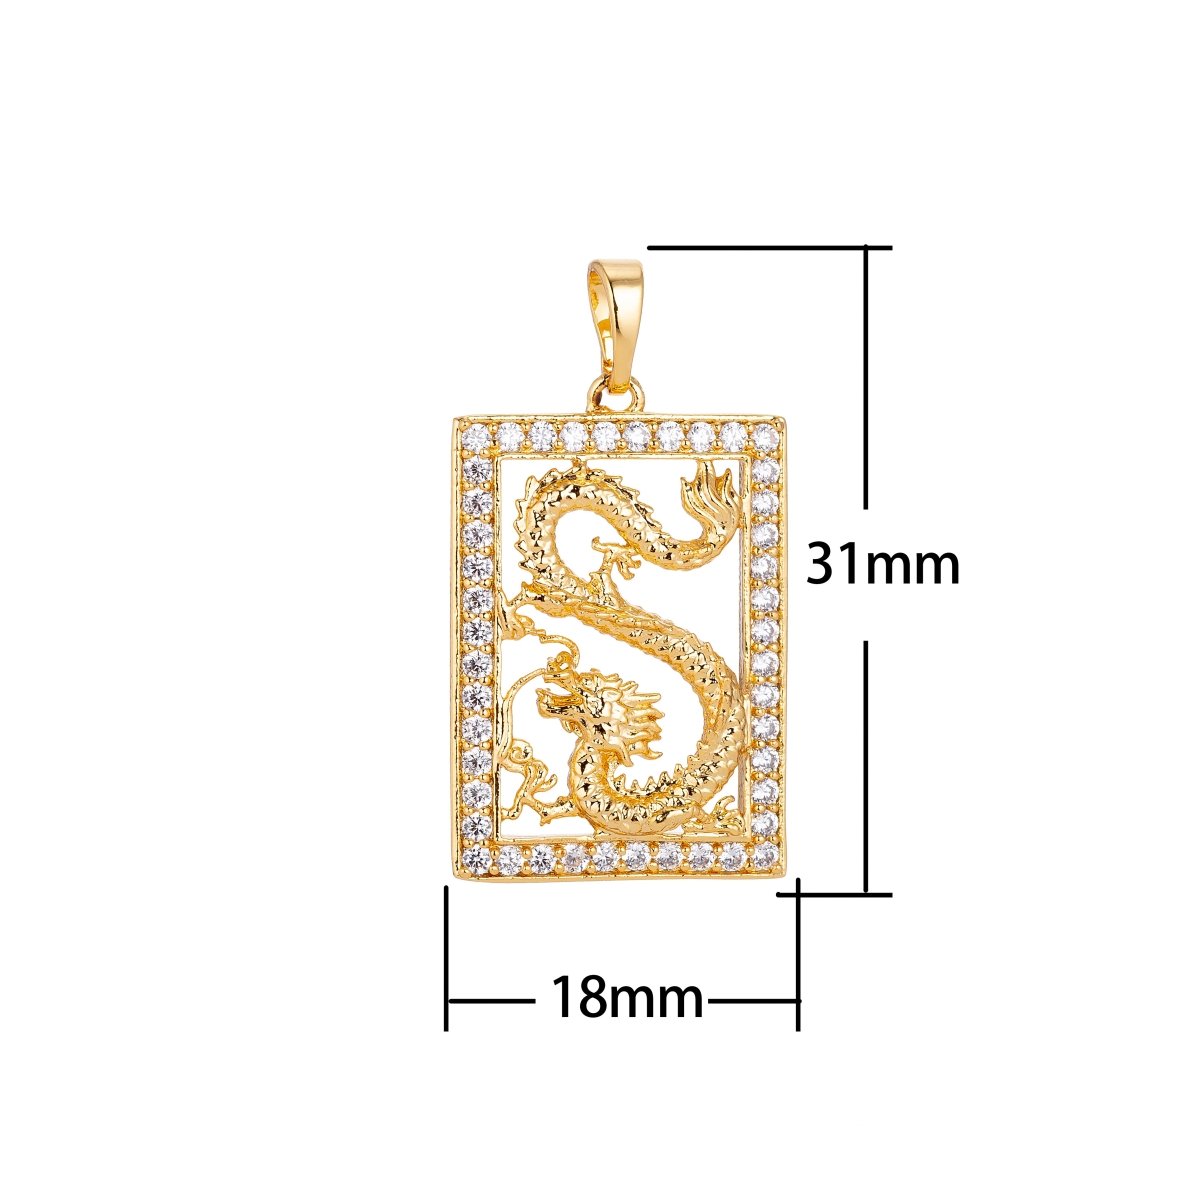 Micro Pave Gold Dragon Frame Majestic, Fairy Tale Mythical Creature tablet Necklace Pendant Charm for Jewelry Making H-633 - DLUXCA